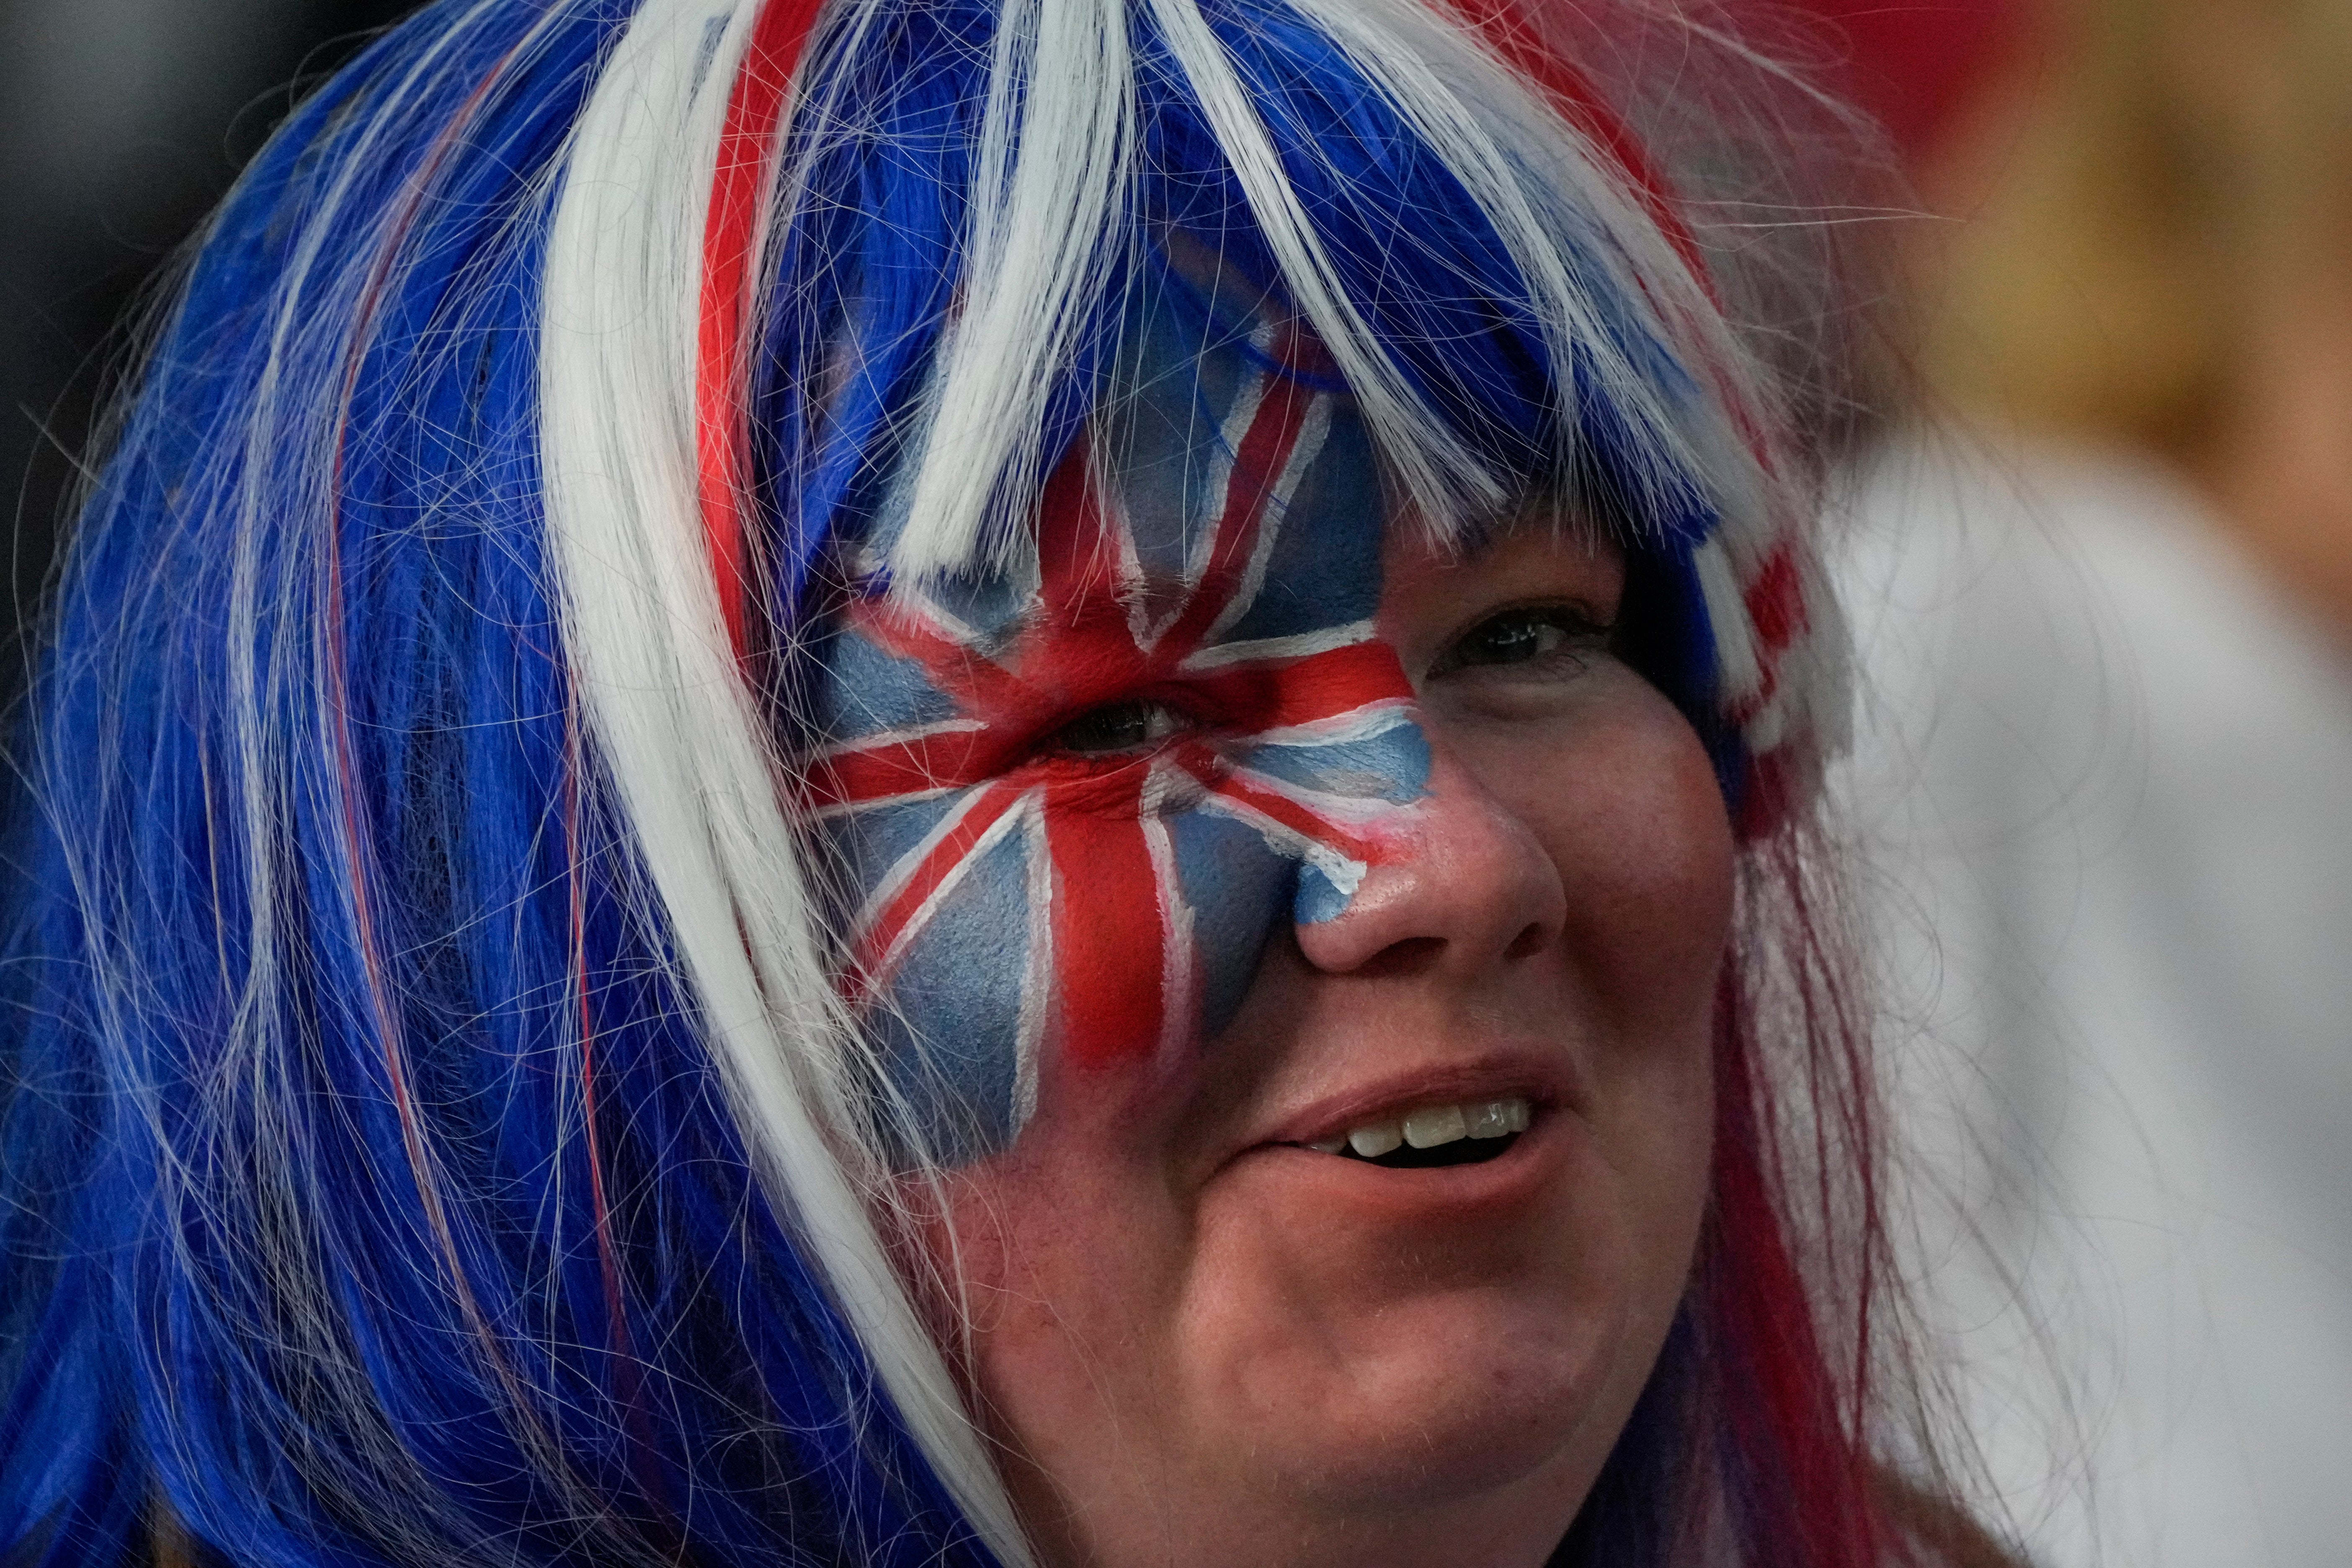 A royal fan with face paint and colored hair is seen prior to the Platinum Jubilee concert